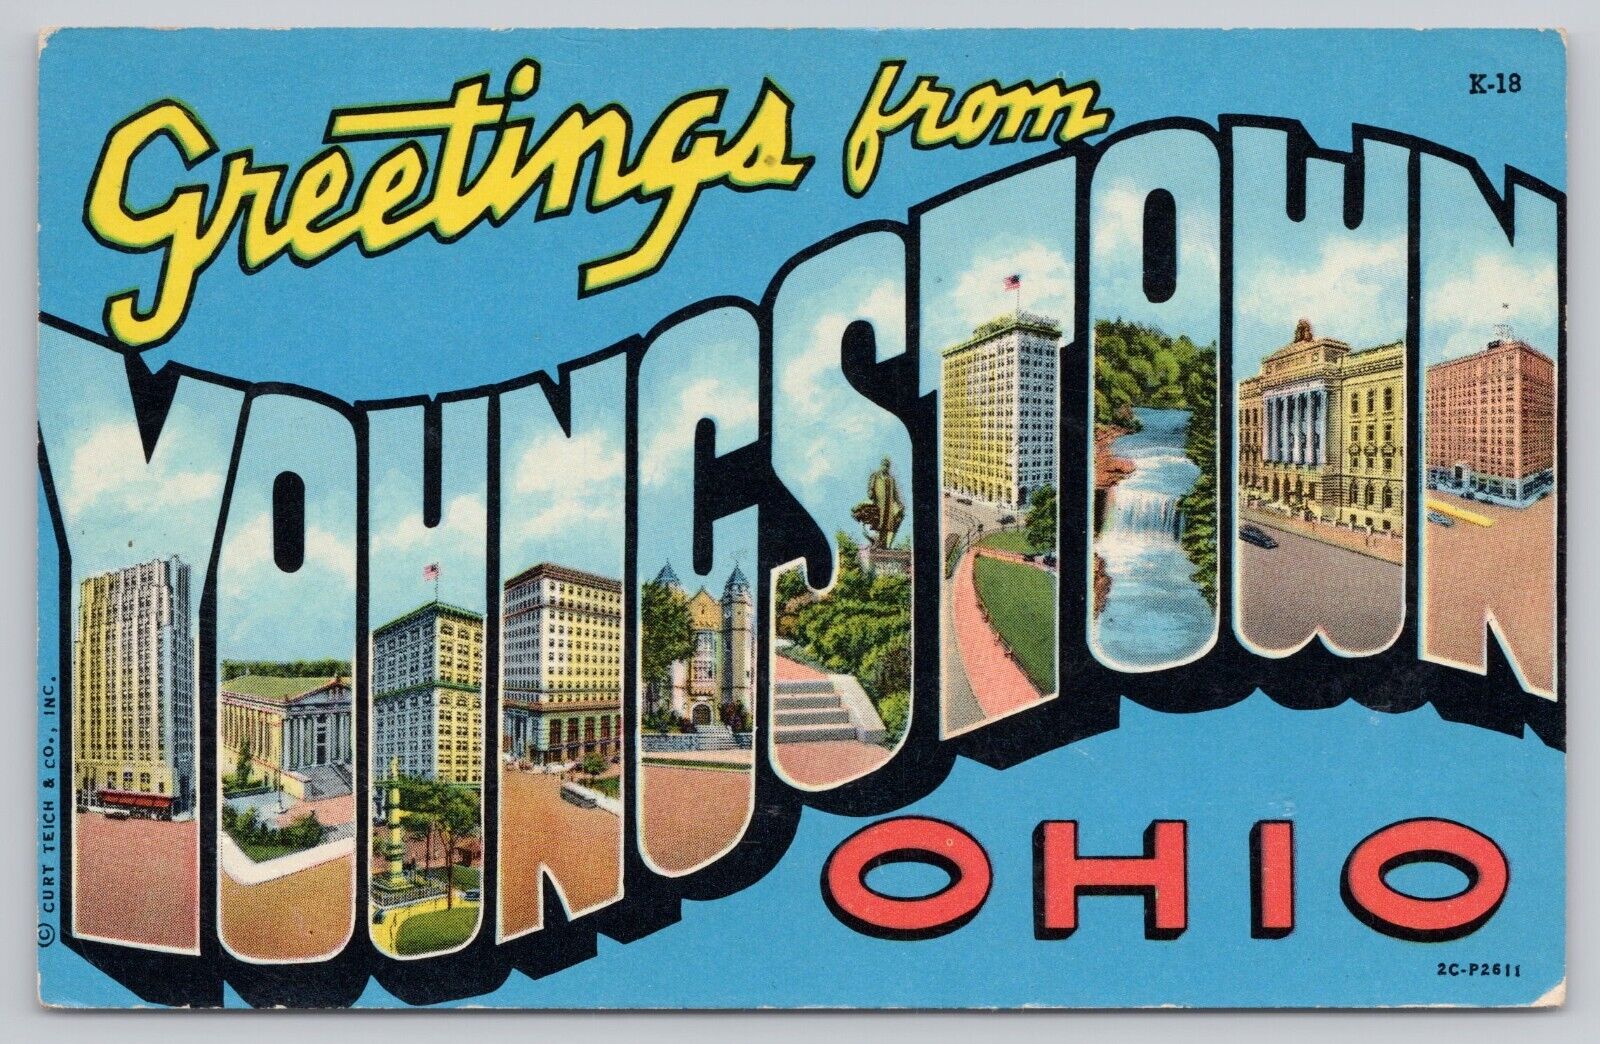 Youngstown Ohio, Large Letter Greetings, Vintage Postcard